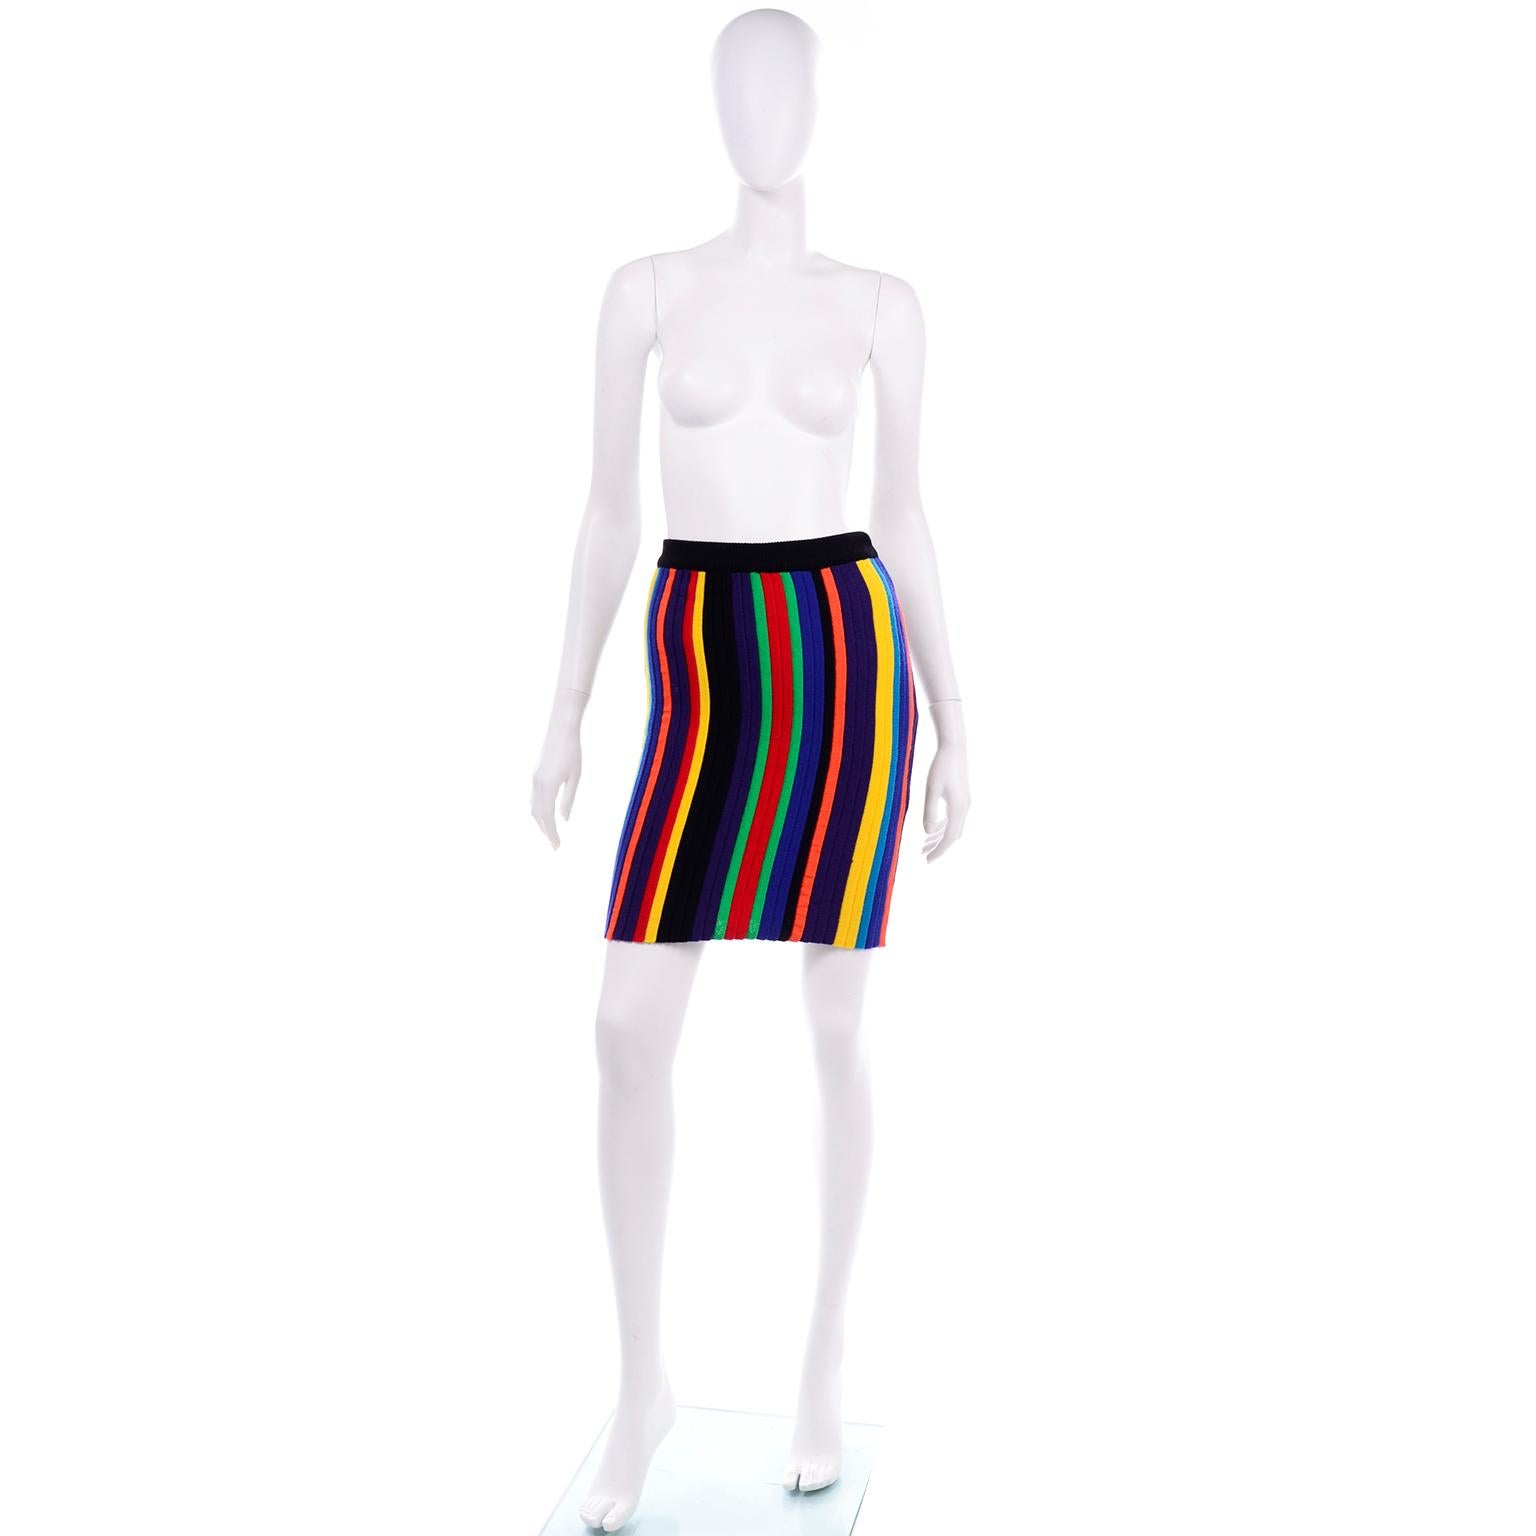 We absolutely adore this colorful striped wool mini skirt by the amazing Christian Lacroix. This gorgeous knit mini skirt has green, red, royal blue, black, orange, purple, yellow, and turquoise vertical stripes. The waistband is elastic and black